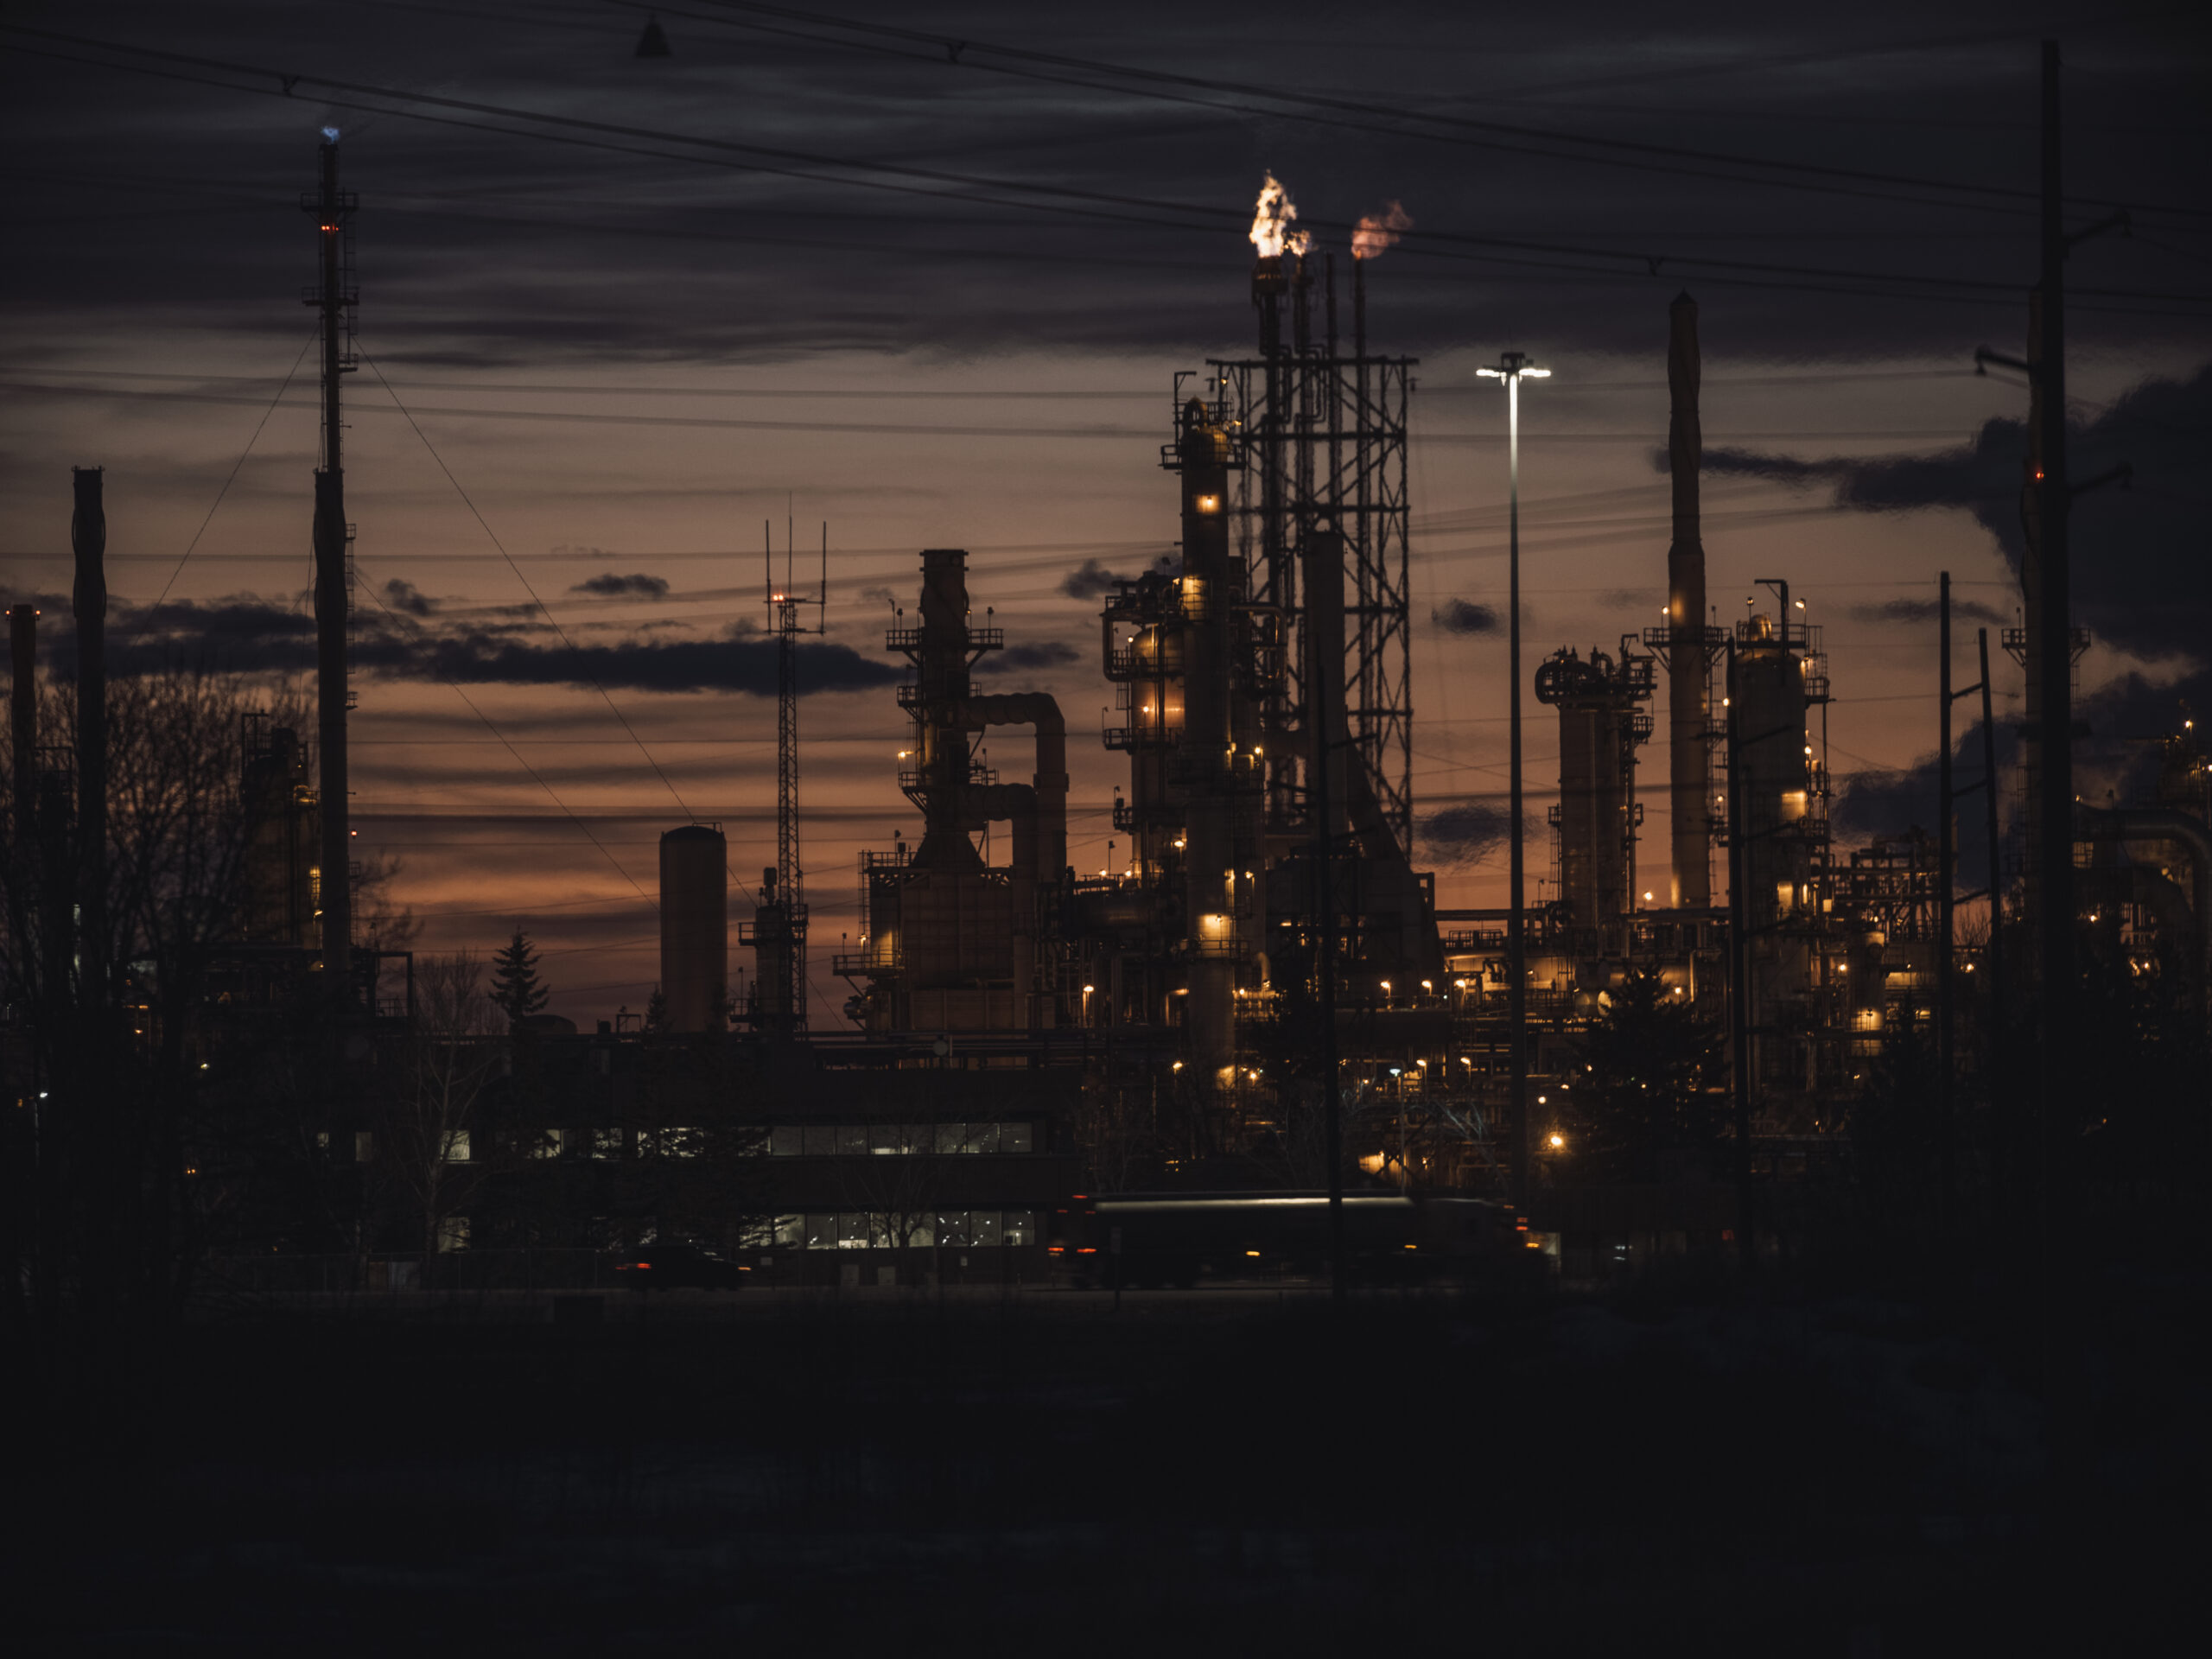 A Suncor refinery at sunset. This facility is one of many that contribute to the poor air quality in Edmonton.